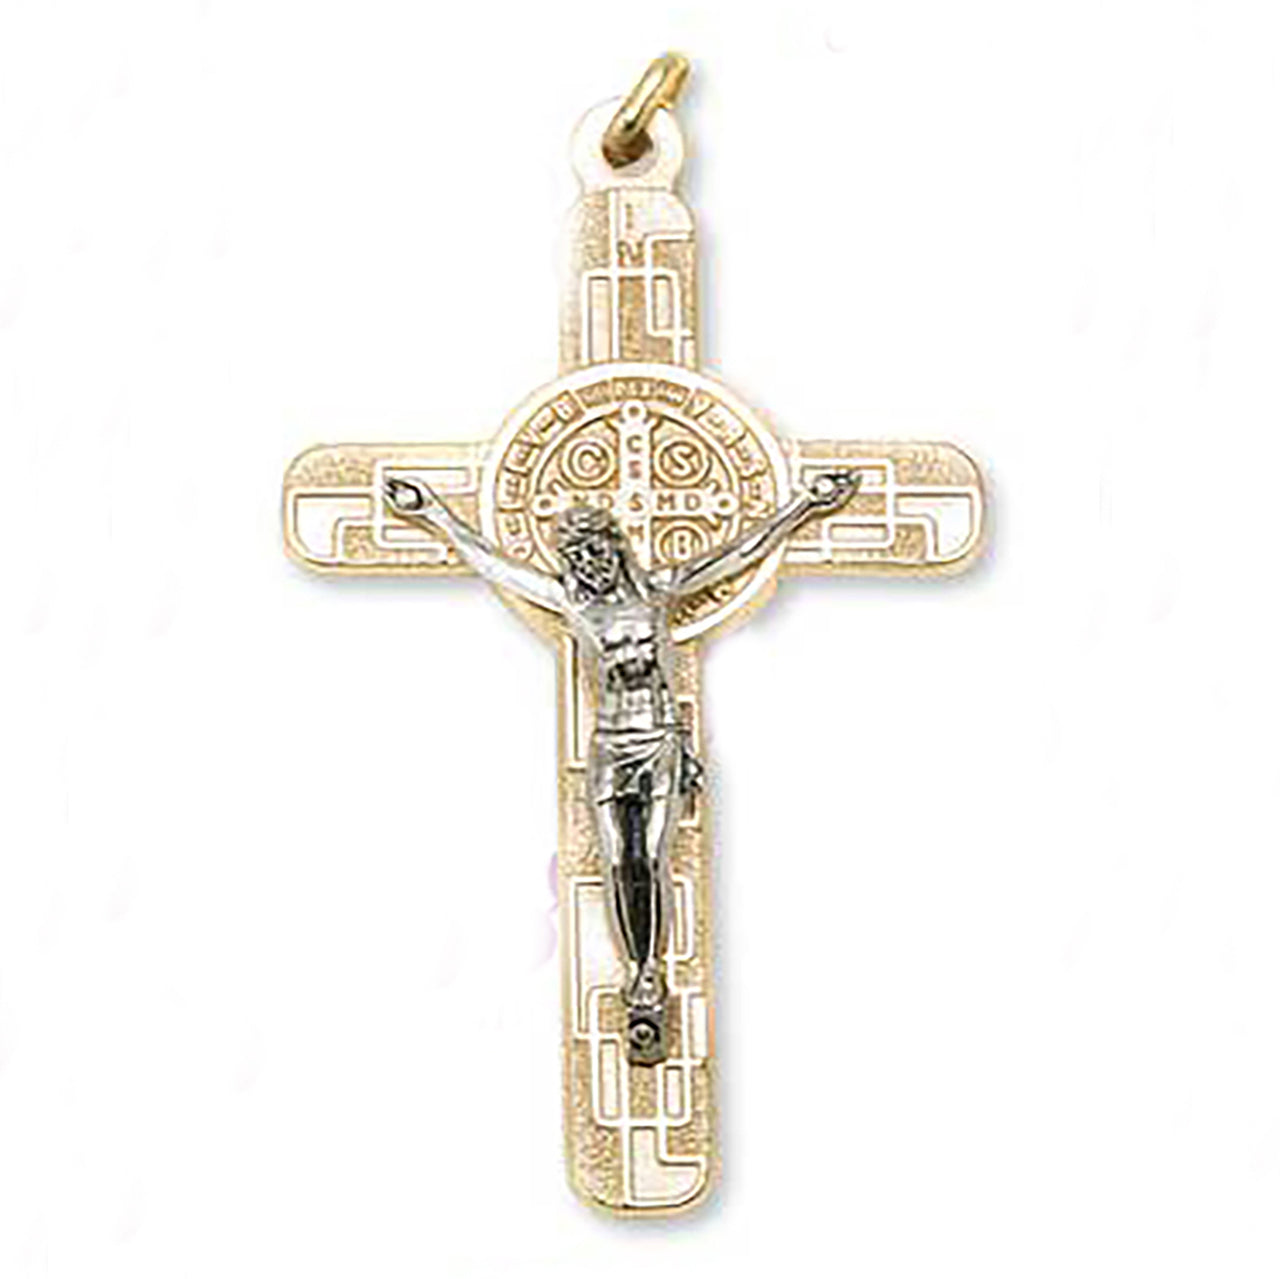 Silver/Gold Tone- St. Benedict Cross with Corpus and Medal